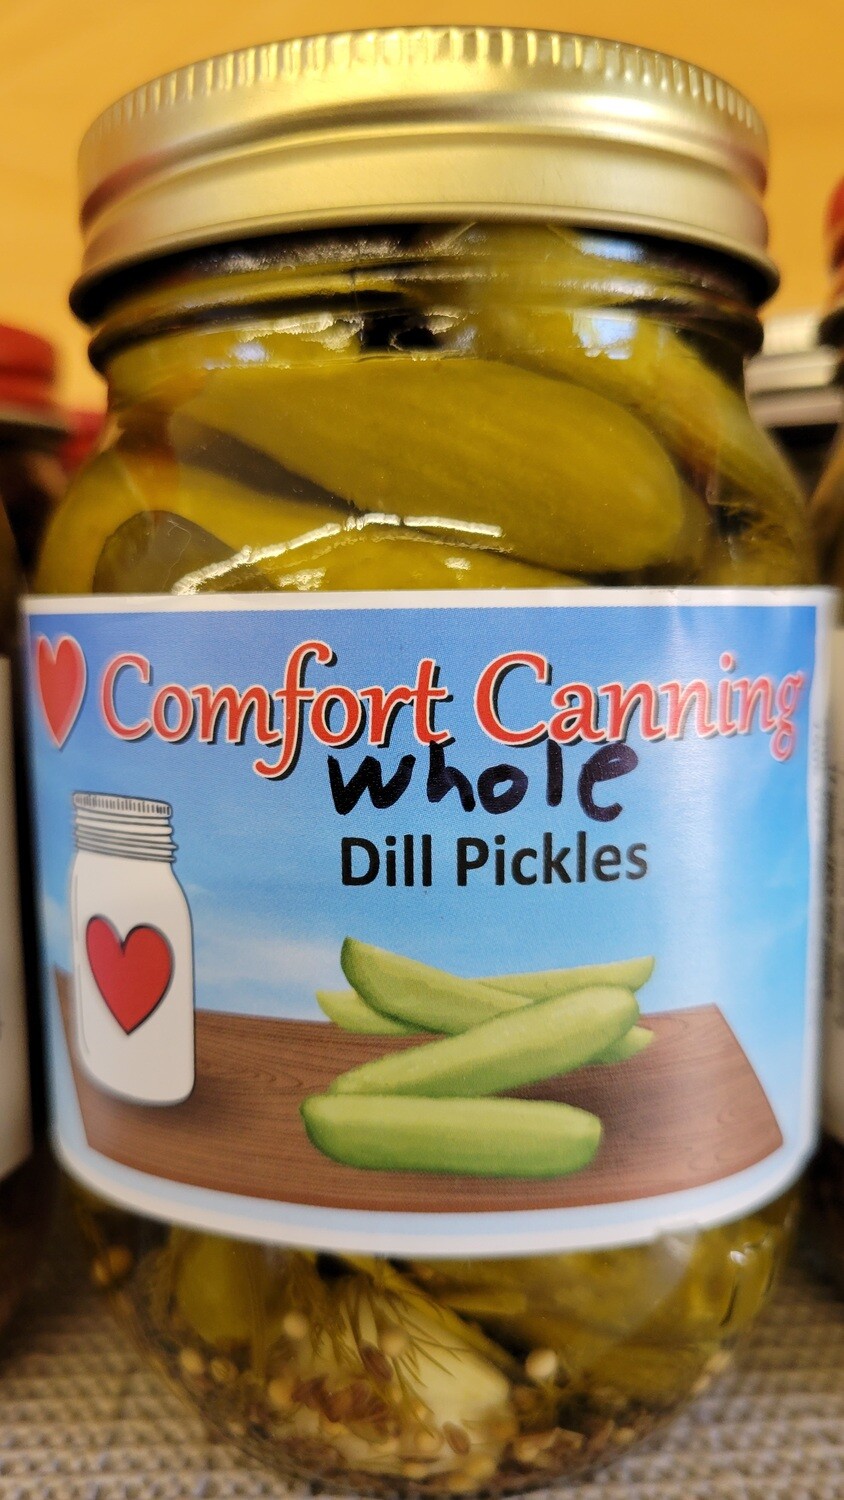 Comfort Canning - Whole Dill Pickles